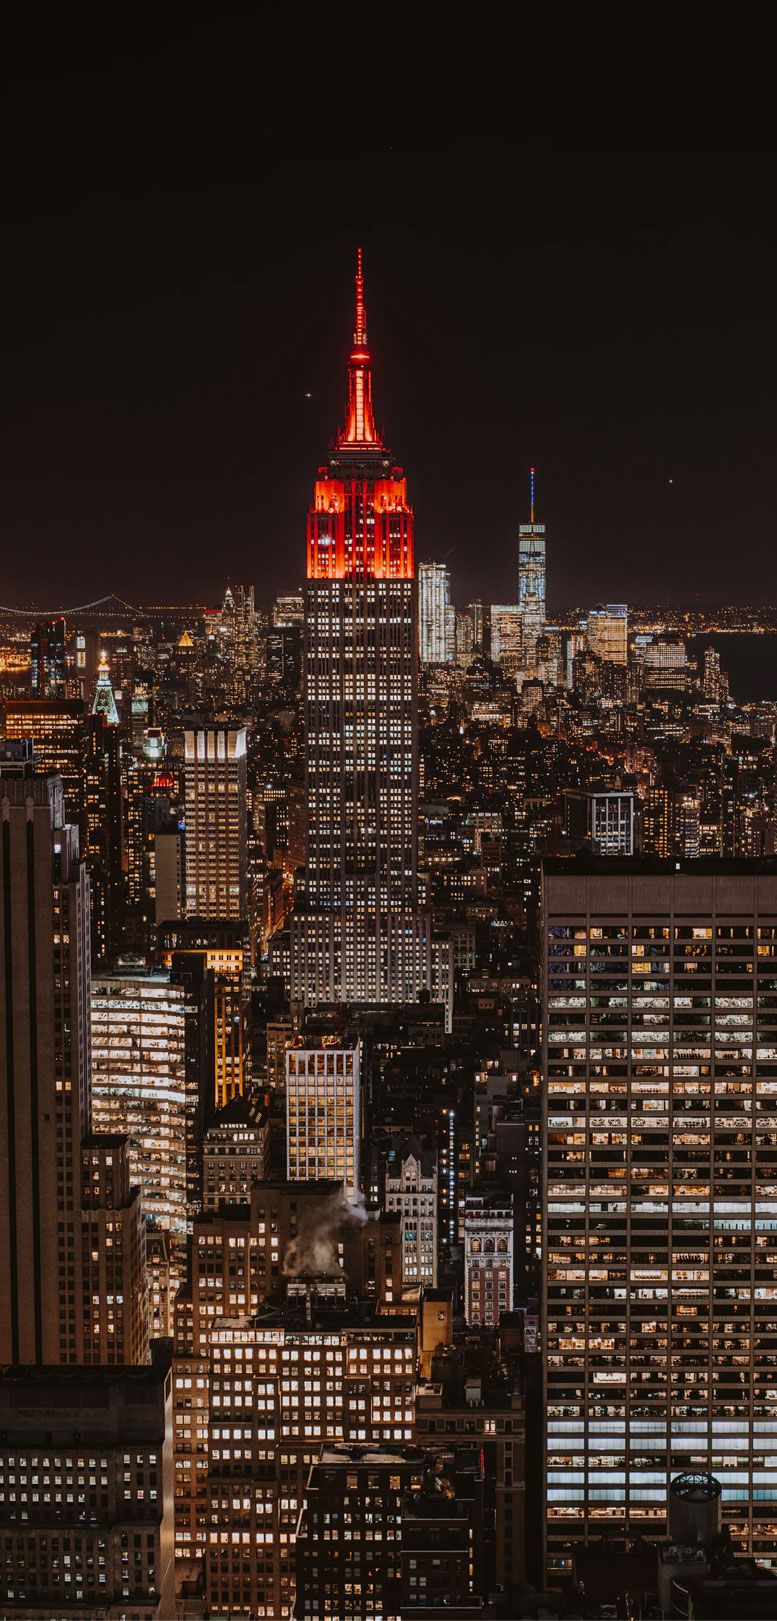 20 Awesome City Iphone Wallpapers - New York Skyline Iphone - HD Wallpaper 